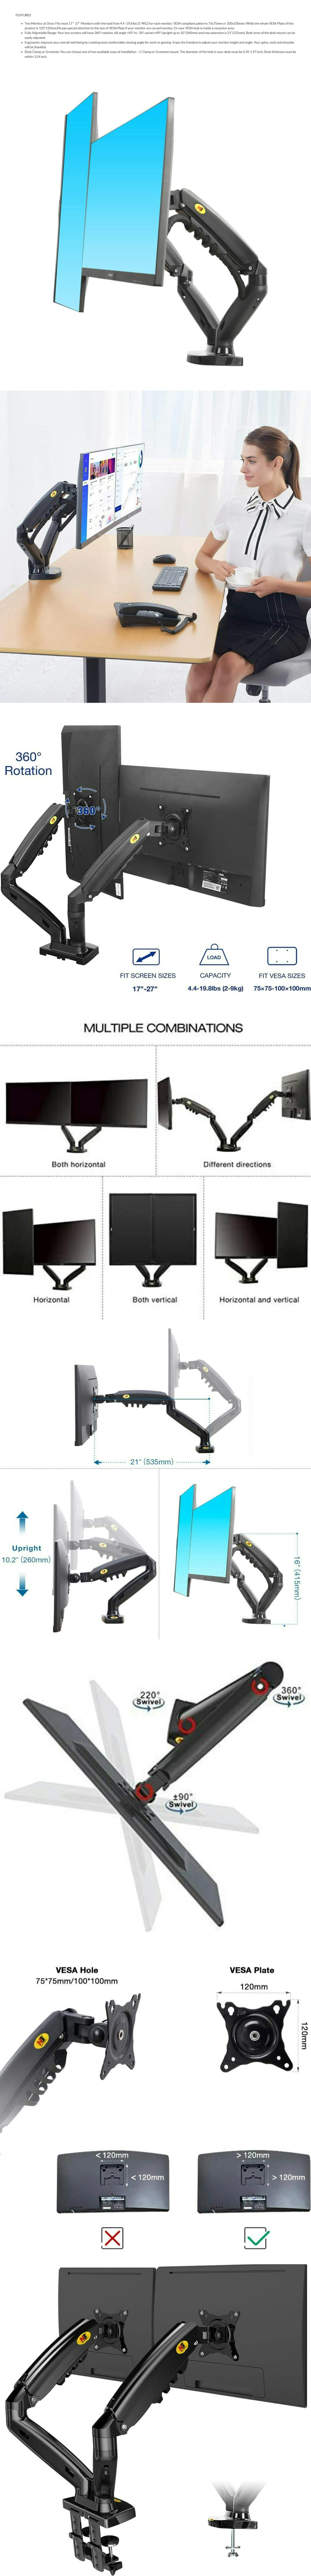 North Bayou F160 Dual Monitor Full Motion Desk Mount with Gas Spring for Two Computer Monitors 17'' - 27'